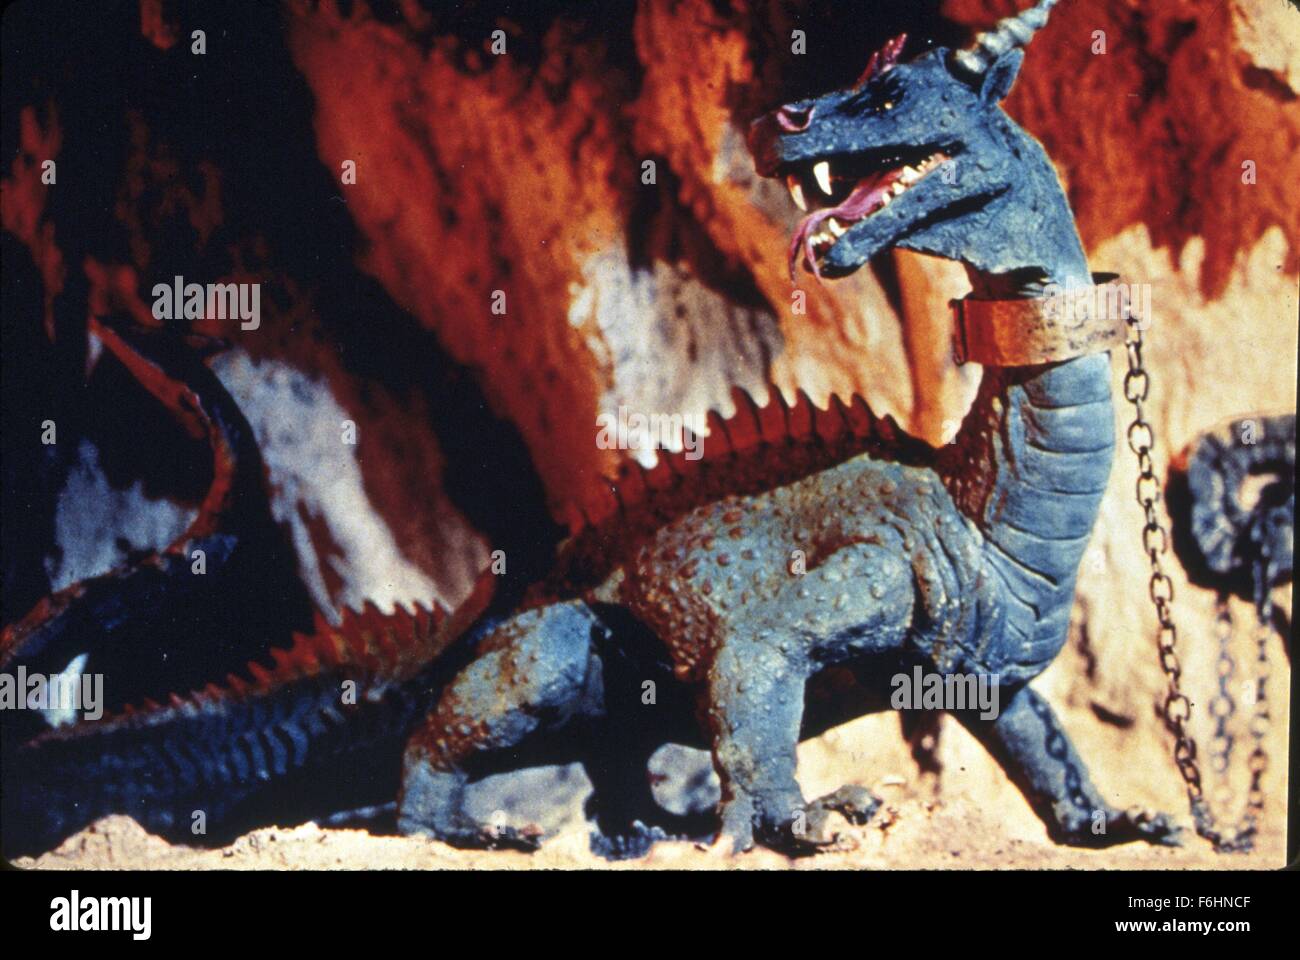 1958, Film Title: 7TH VOYAGE OF SINBAD, Studio: COLUMBIA, Pictured: ITS & ALIENS! THINGS, DRAGON, MONSTER, SHACKLES, CHAINS, RESTRAINED, ROARING. (Credit Image: SNAP) Stock Photo